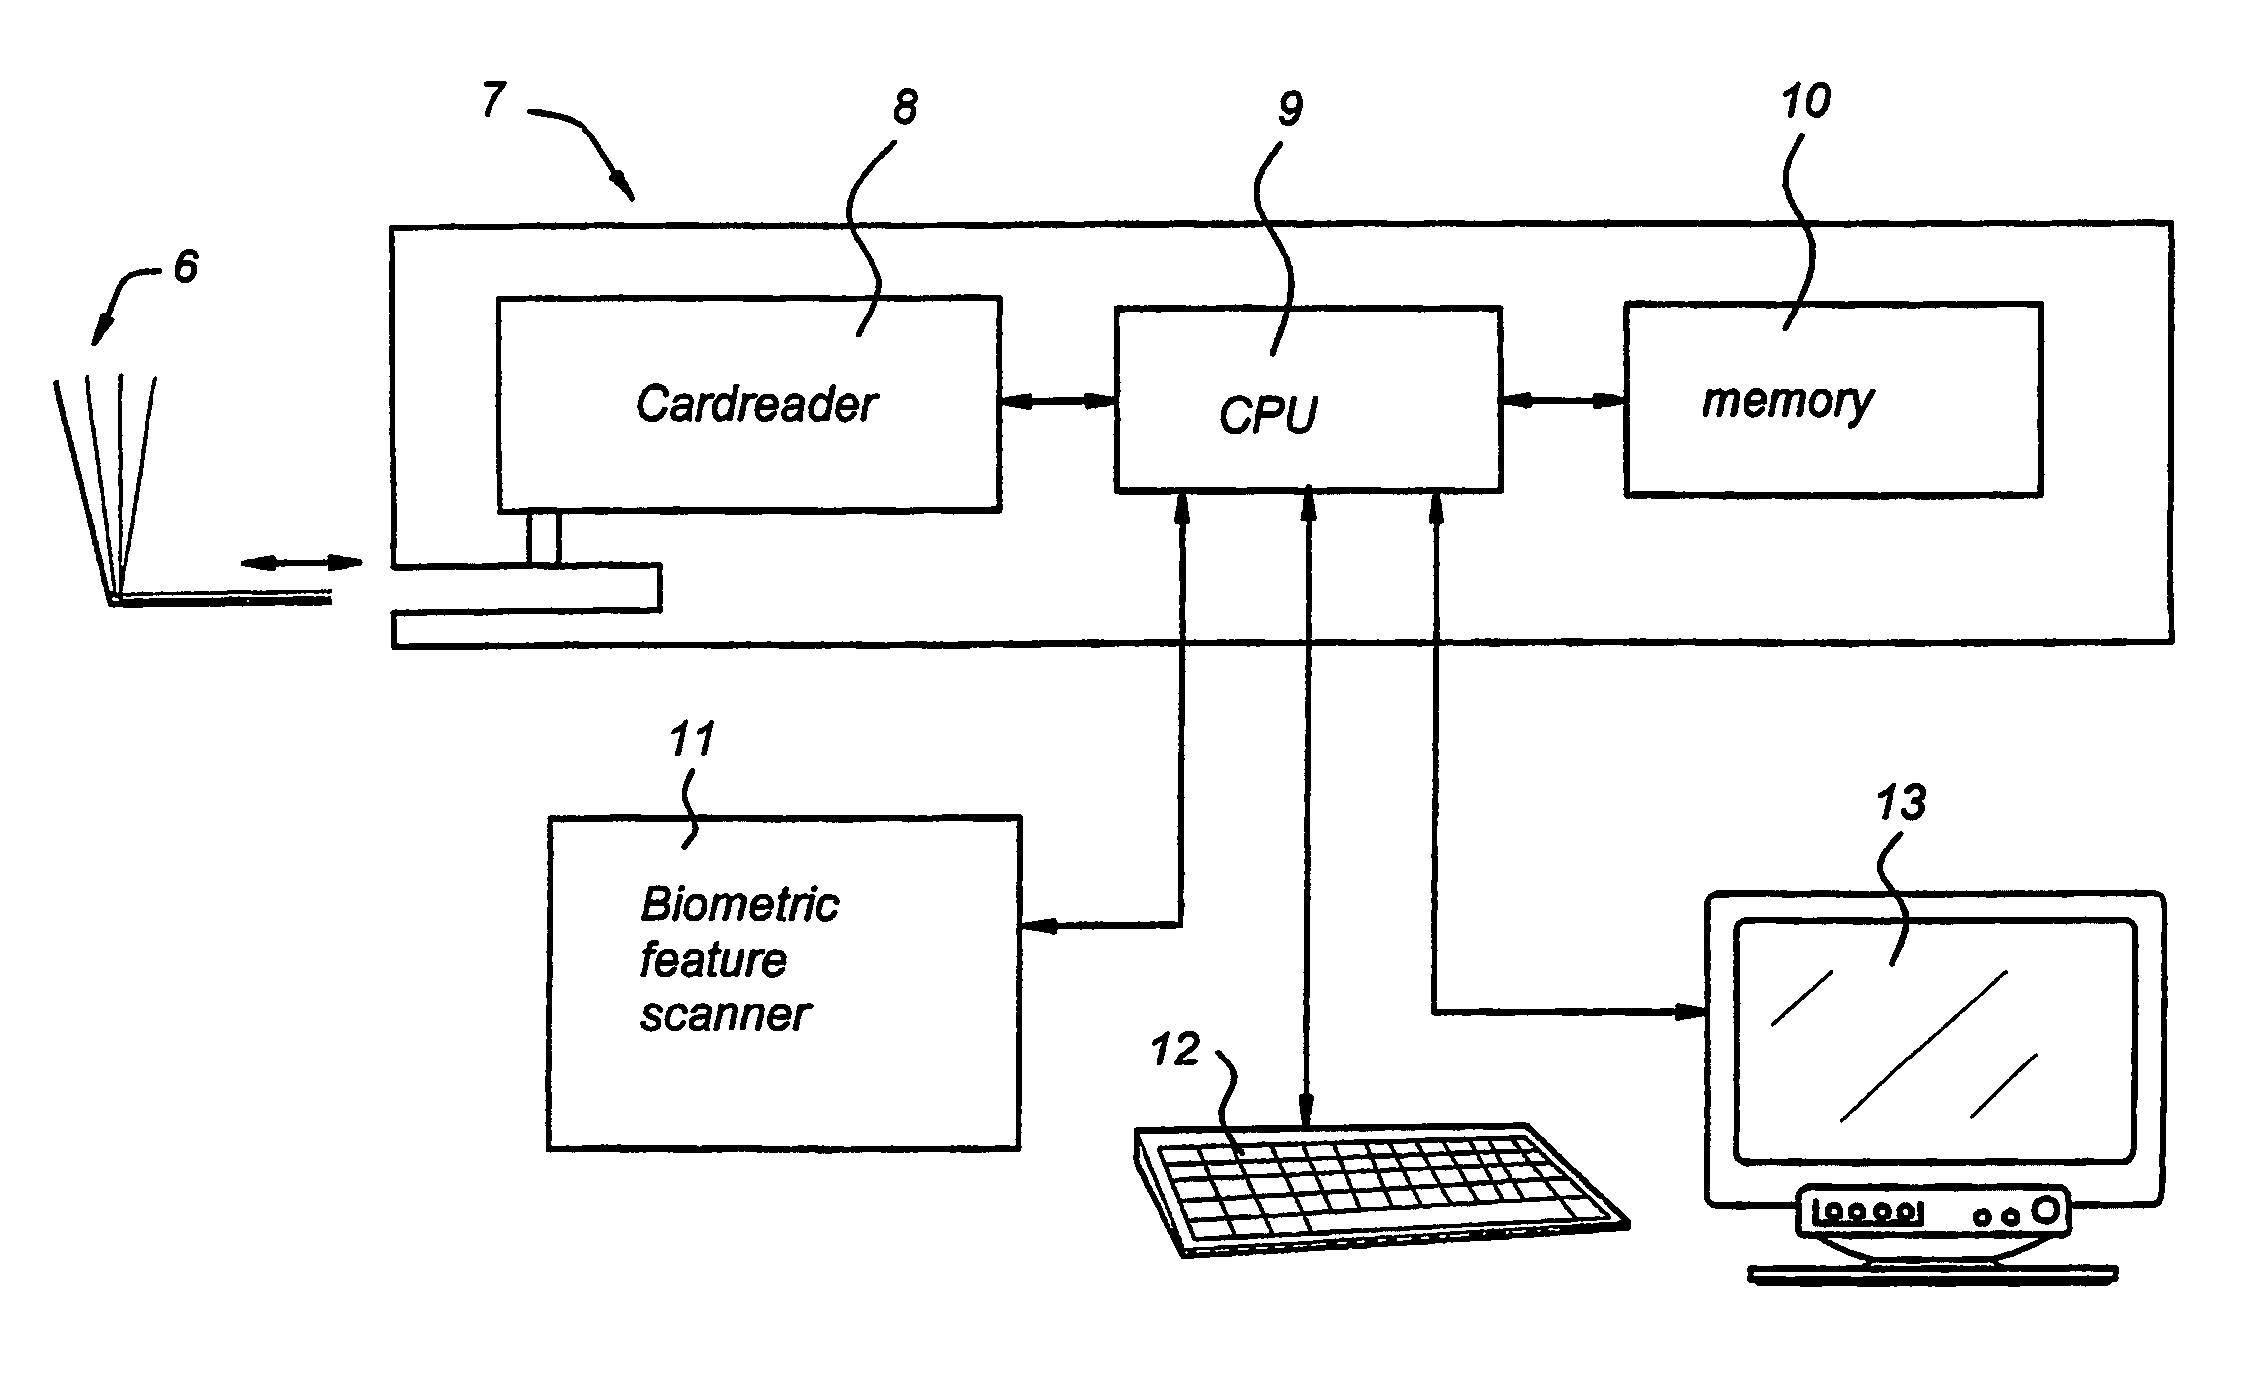 System and method for automatic verification of the holder of an authorization document and automatic establishment of the authenticity and validity of the authorization document